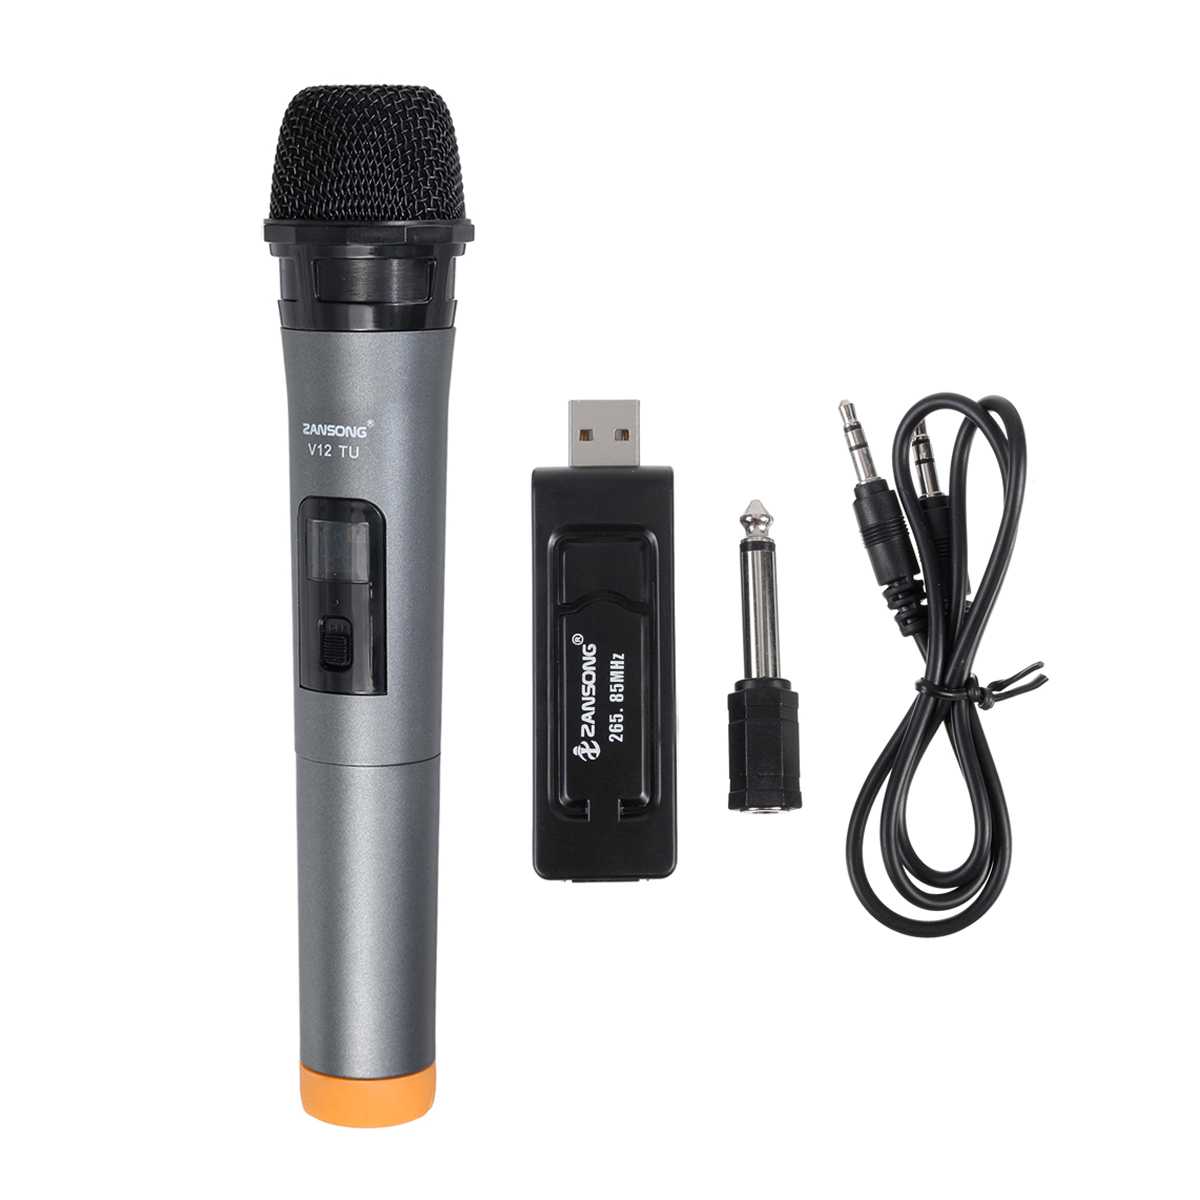 Professional-UHF-Wireless-Microphone-Handheld-Mic-System-Karaoke-With-Receiver-and-Display-Screen-1594315-5